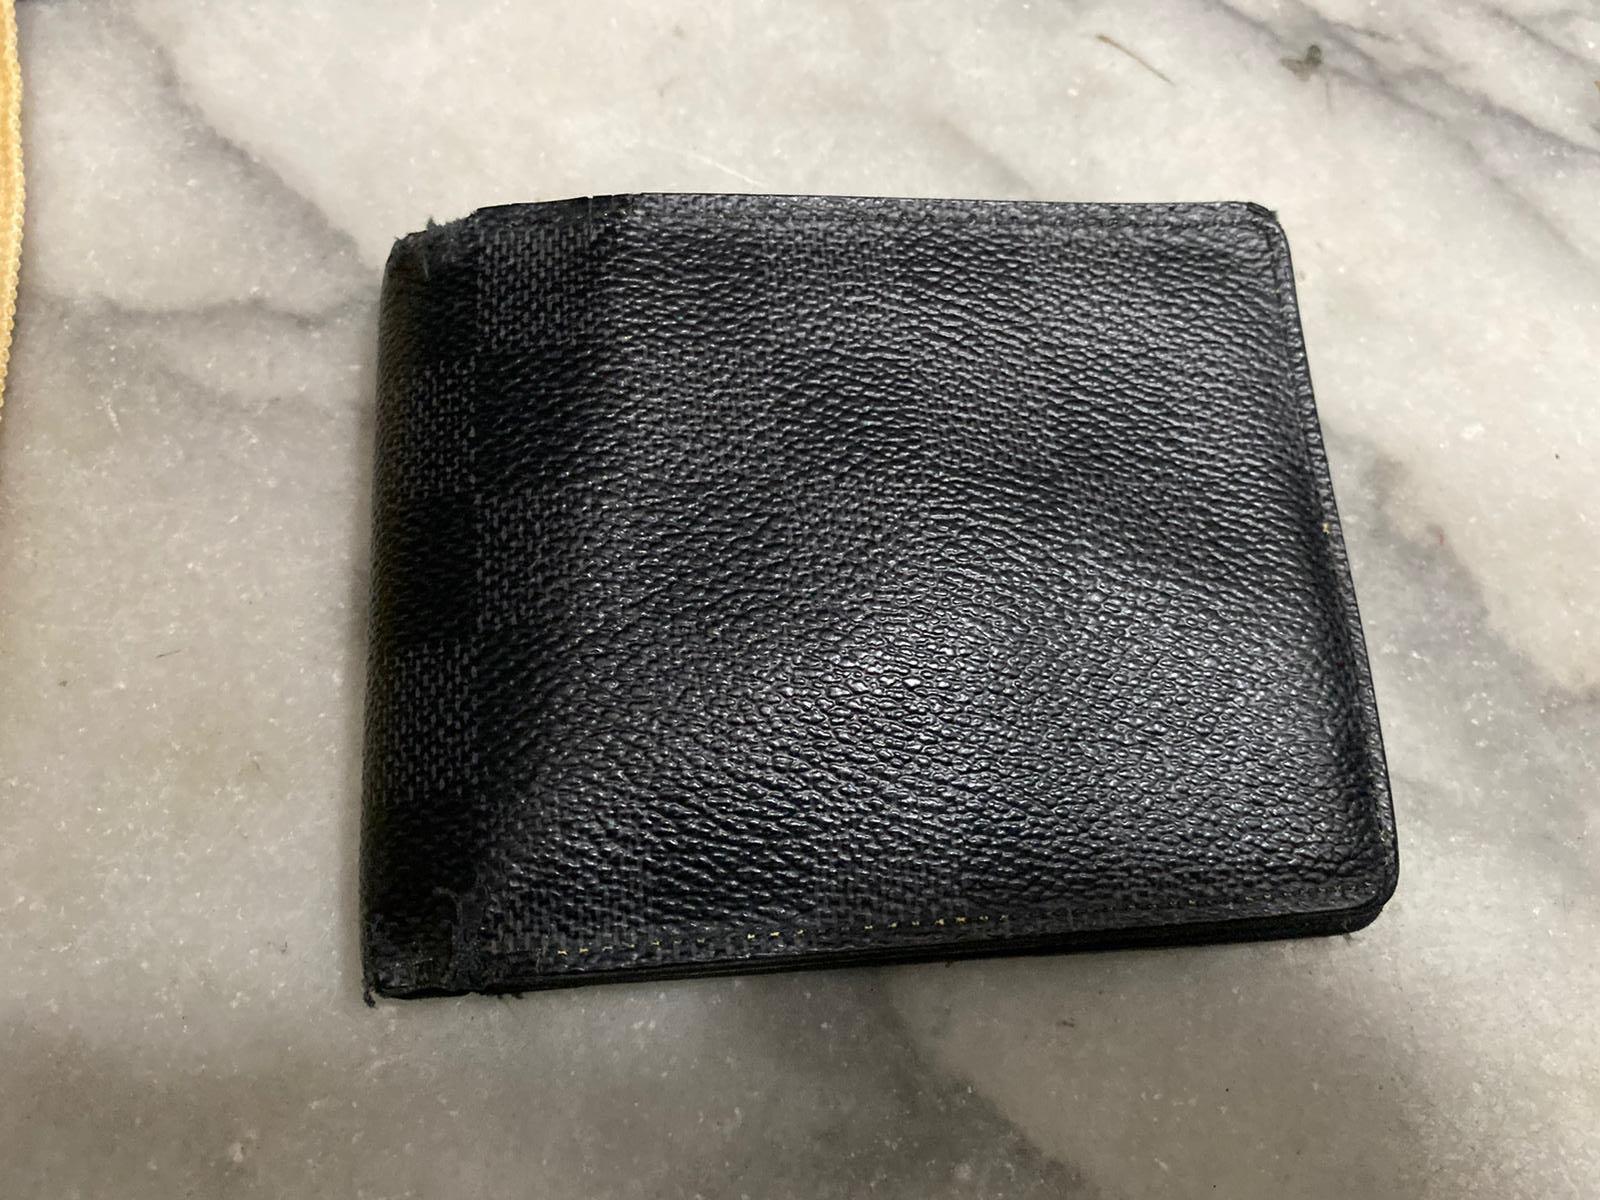 LV) louis vuitton M30295 multiple wallet for sale, Men's Fashion, Watches &  Accessories, Wallets & Card Holders on Carousell